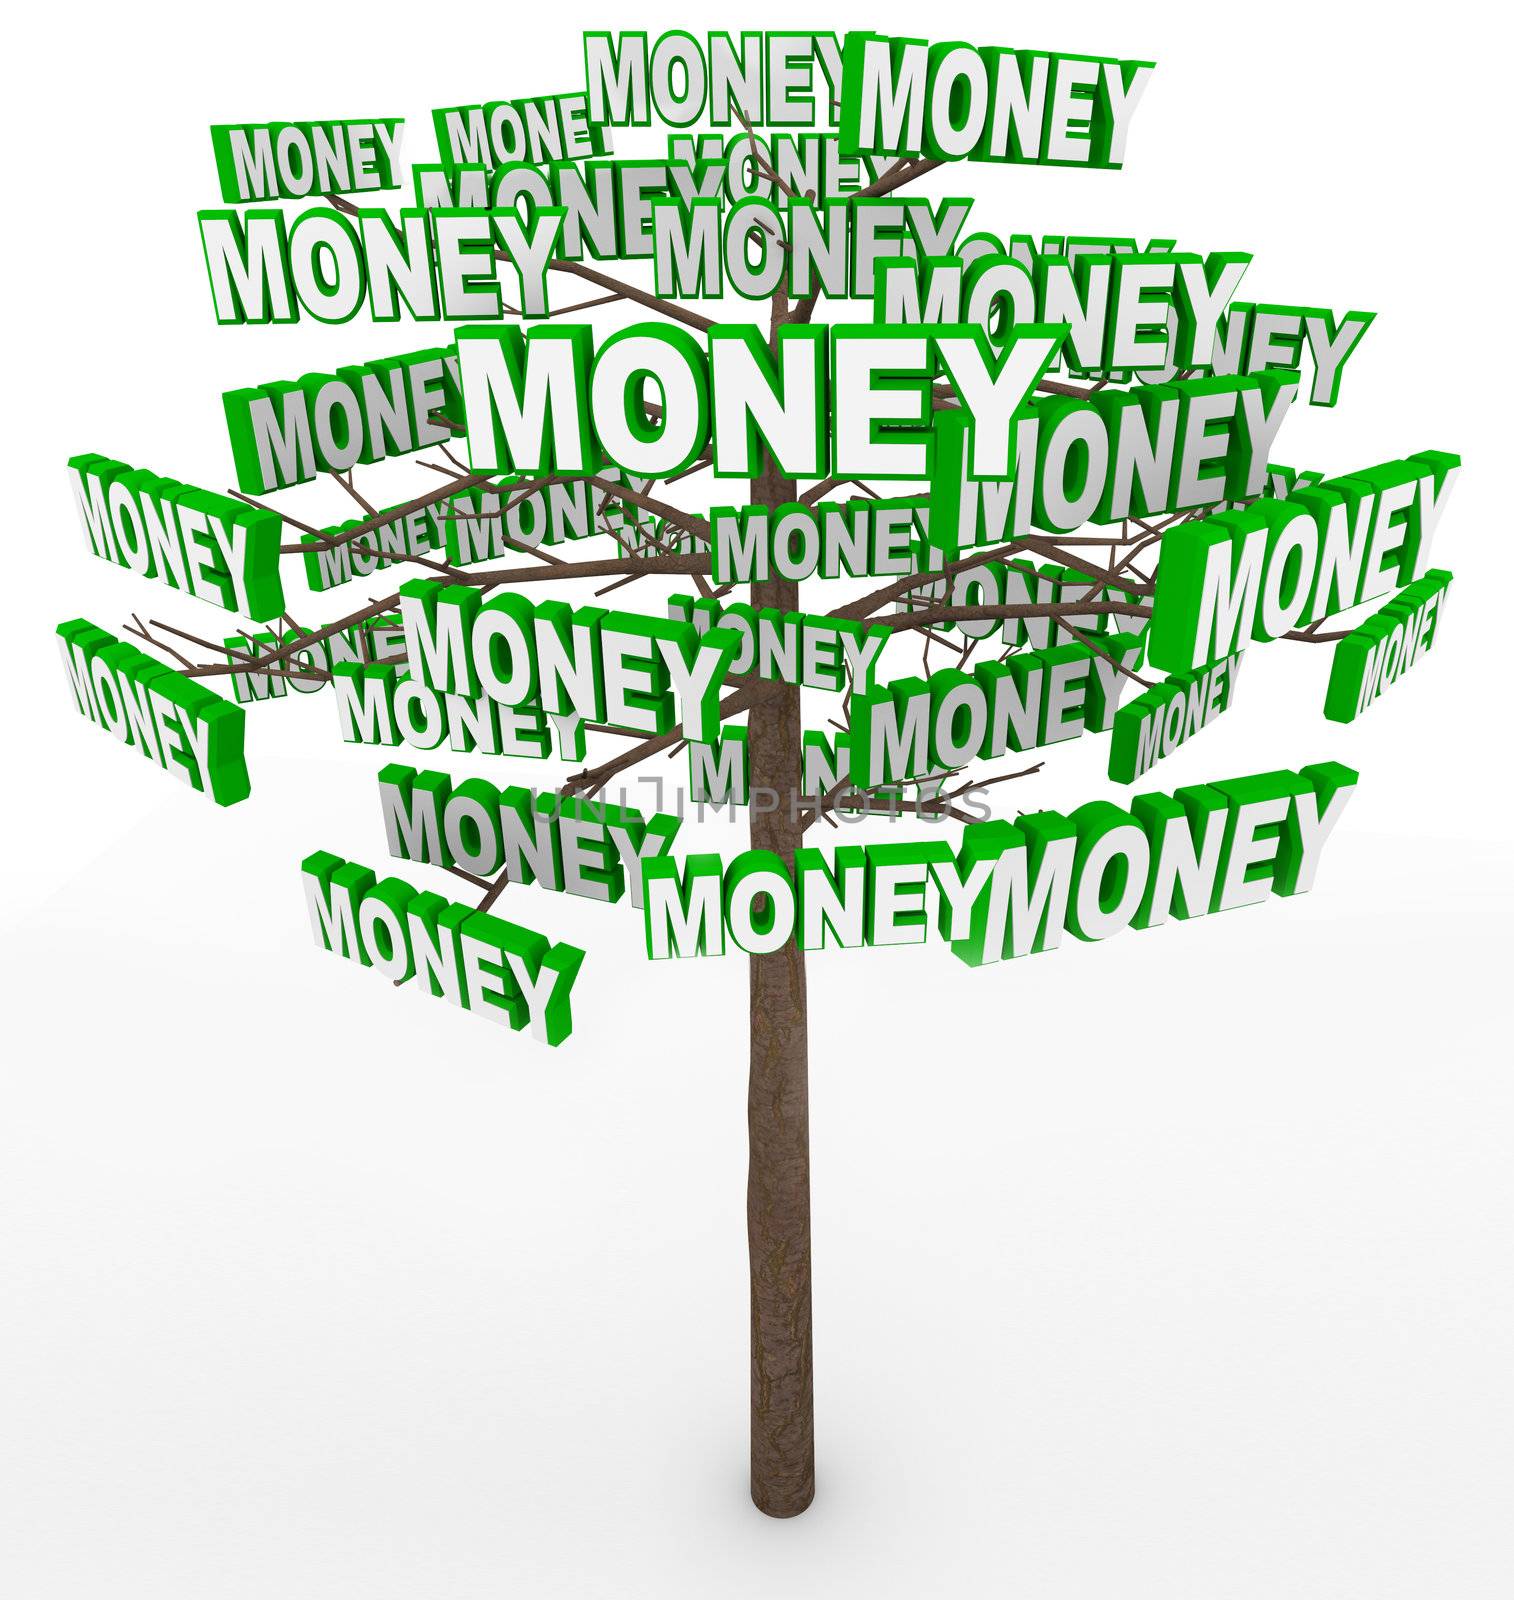 Get rich by picking money off tree branches despite the saying Money doesn't grow on trees